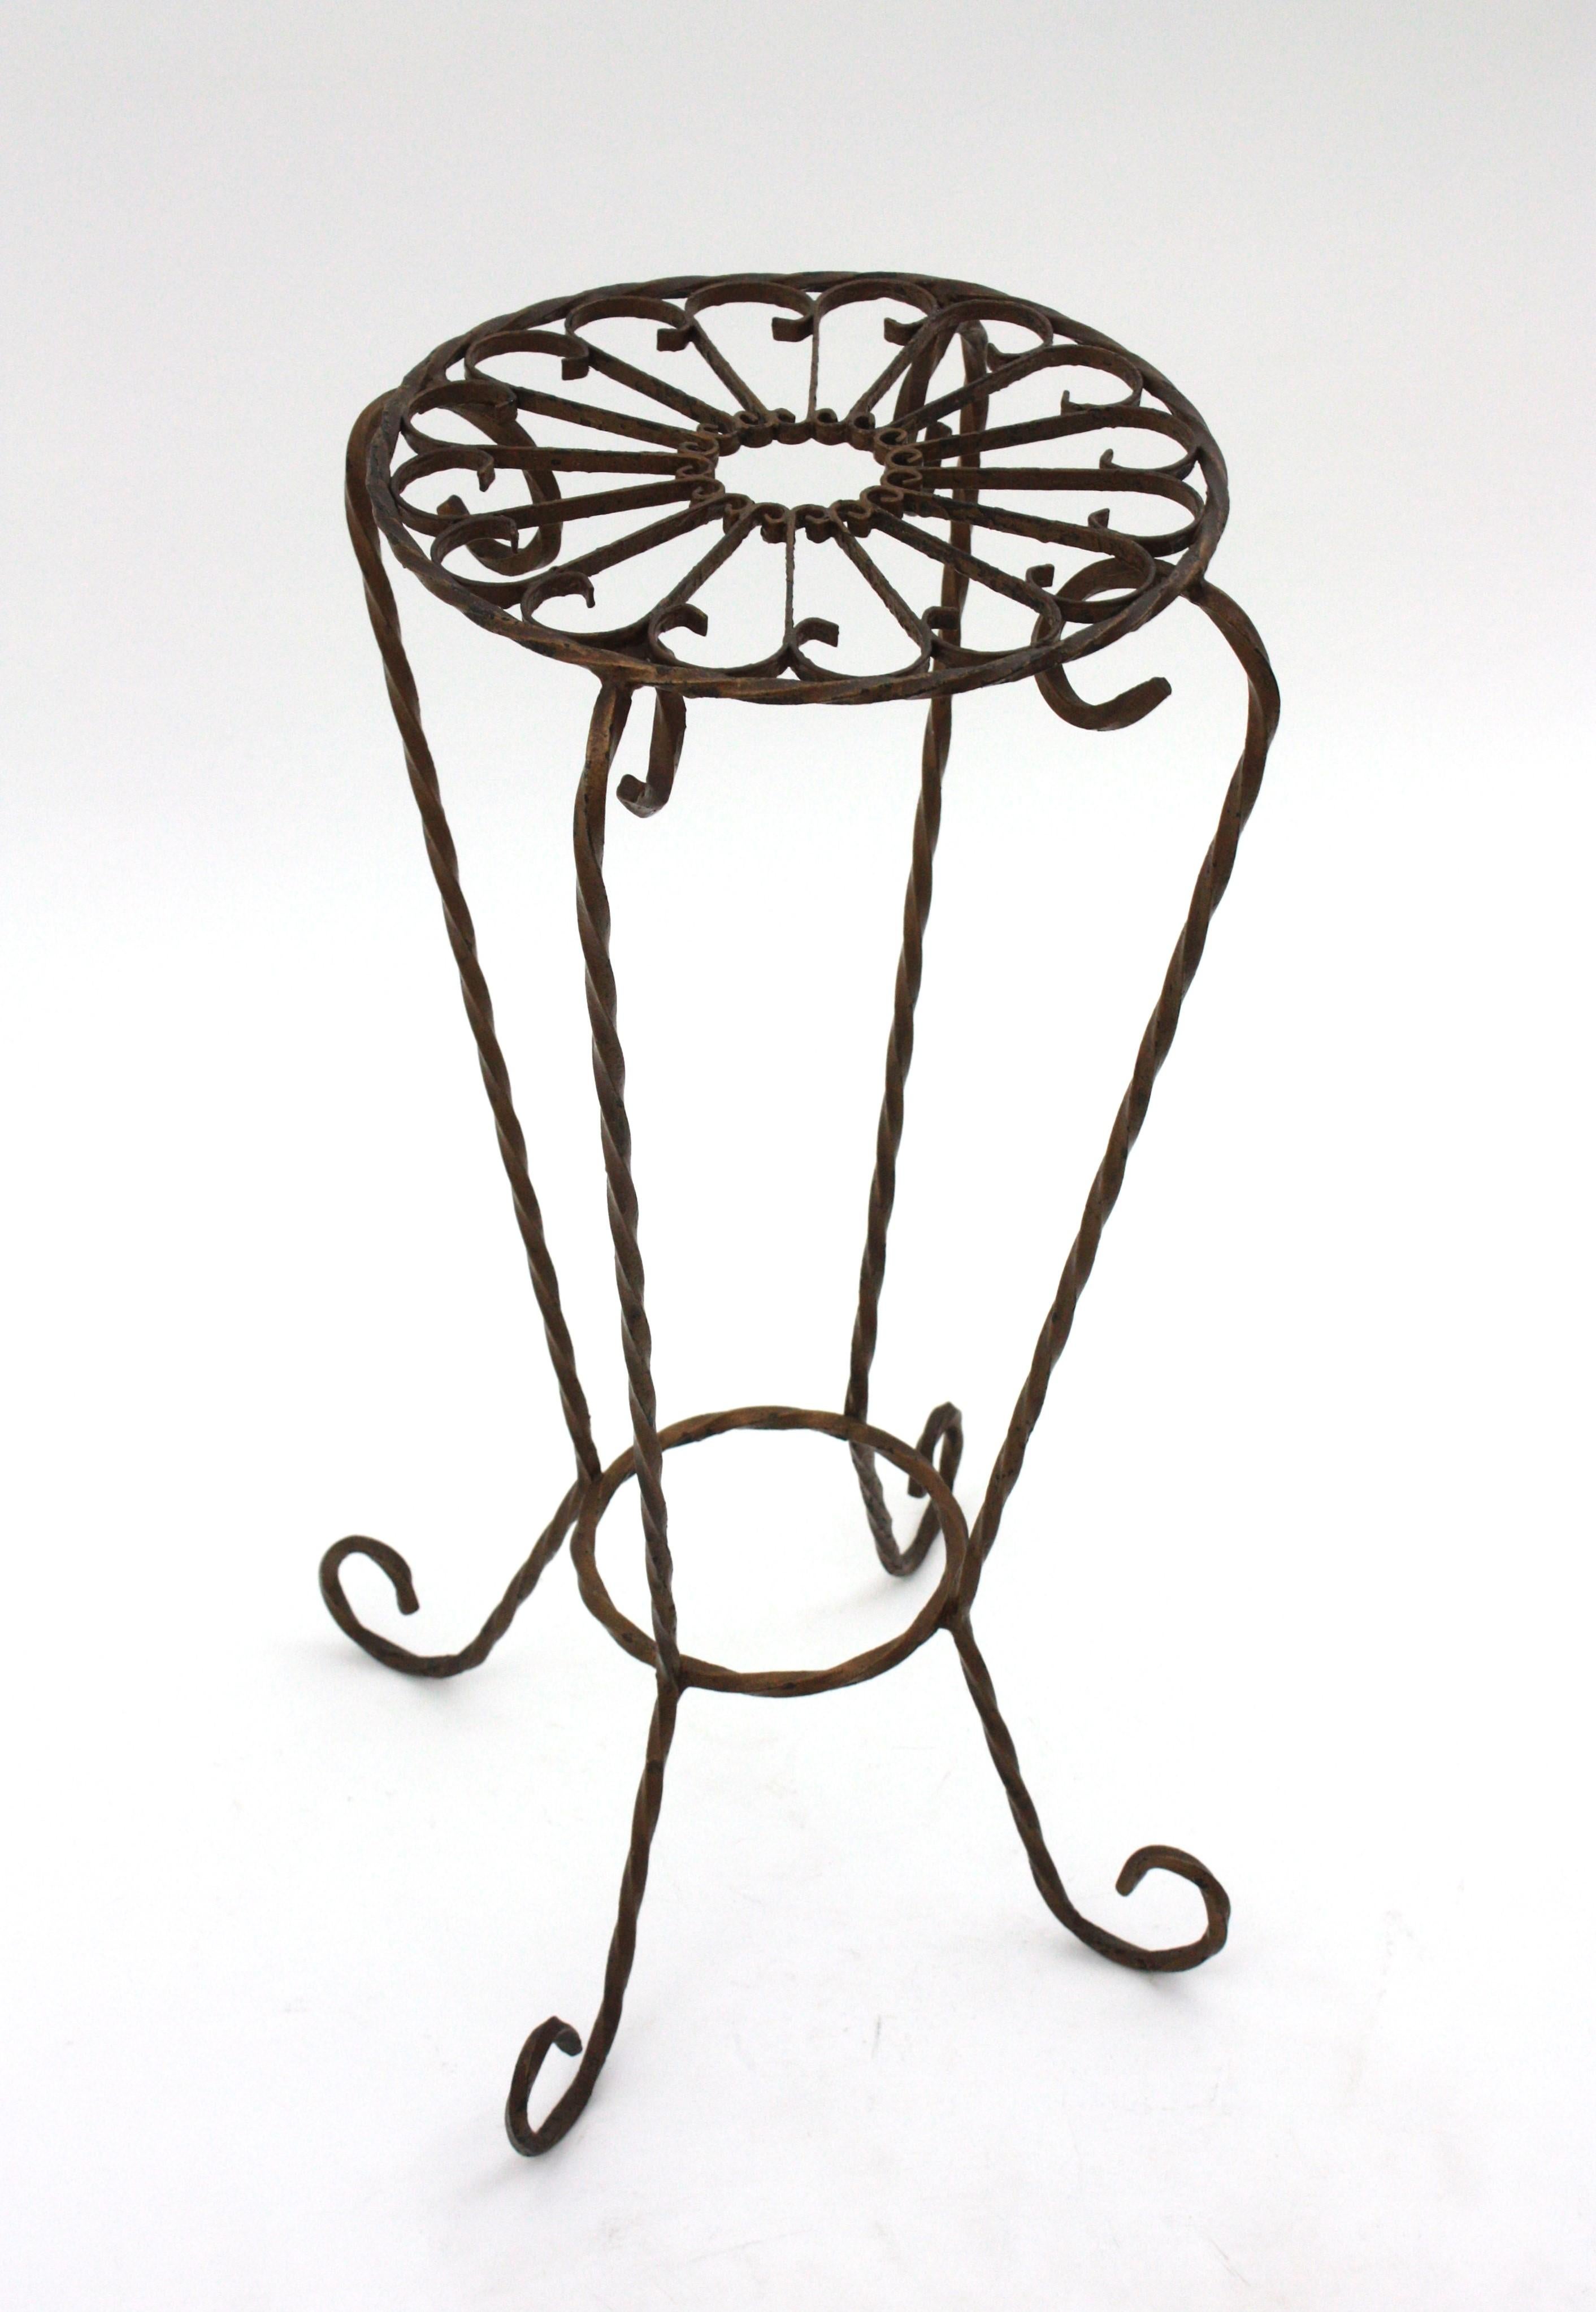 Spanish Scrollwork Wrought Iron Side Table / Drinks Table, 1950s For Sale 4